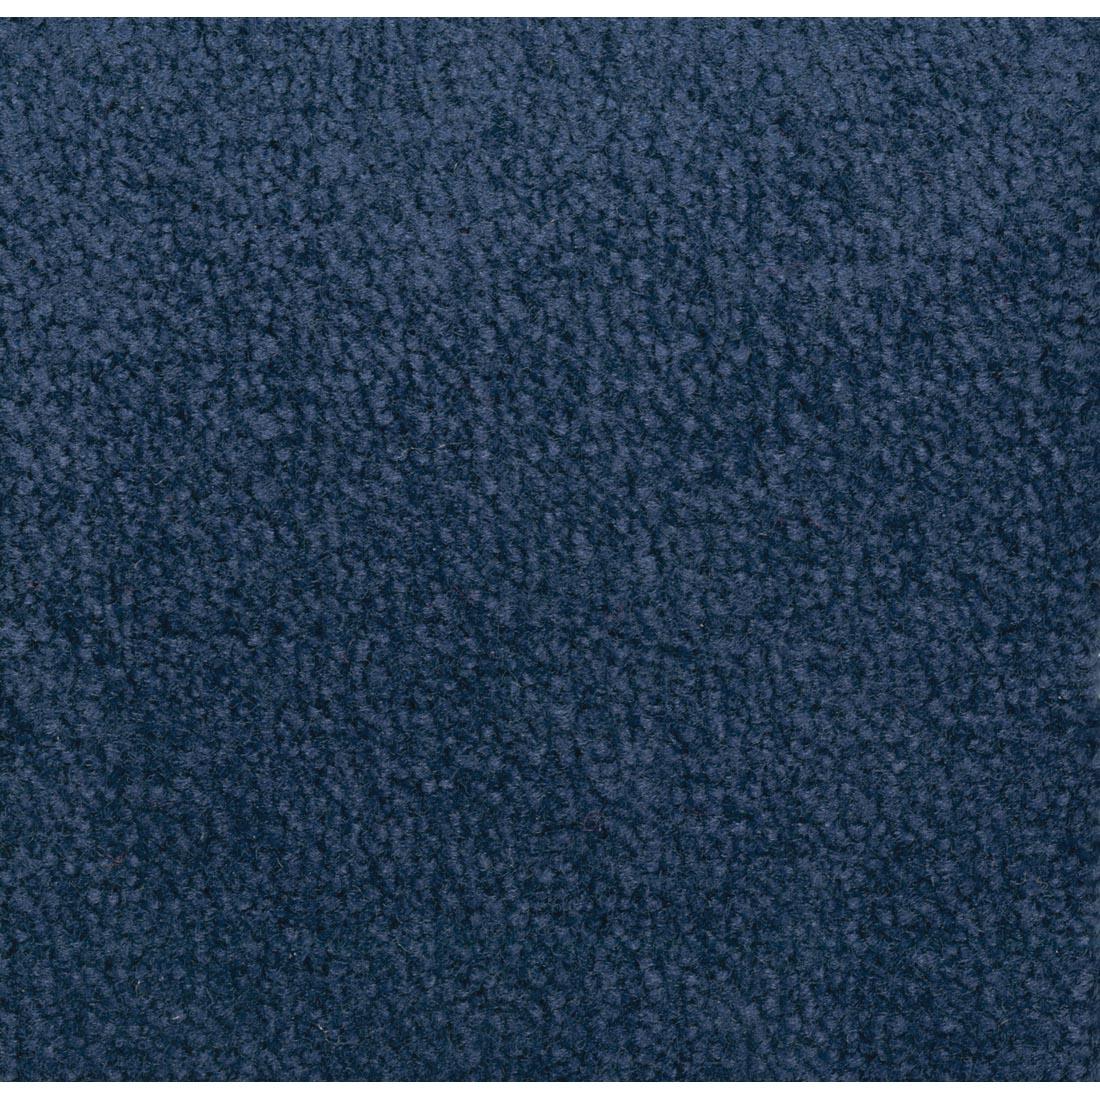 Color swatch of the Ocean Blue Rug by Carpets For Kids